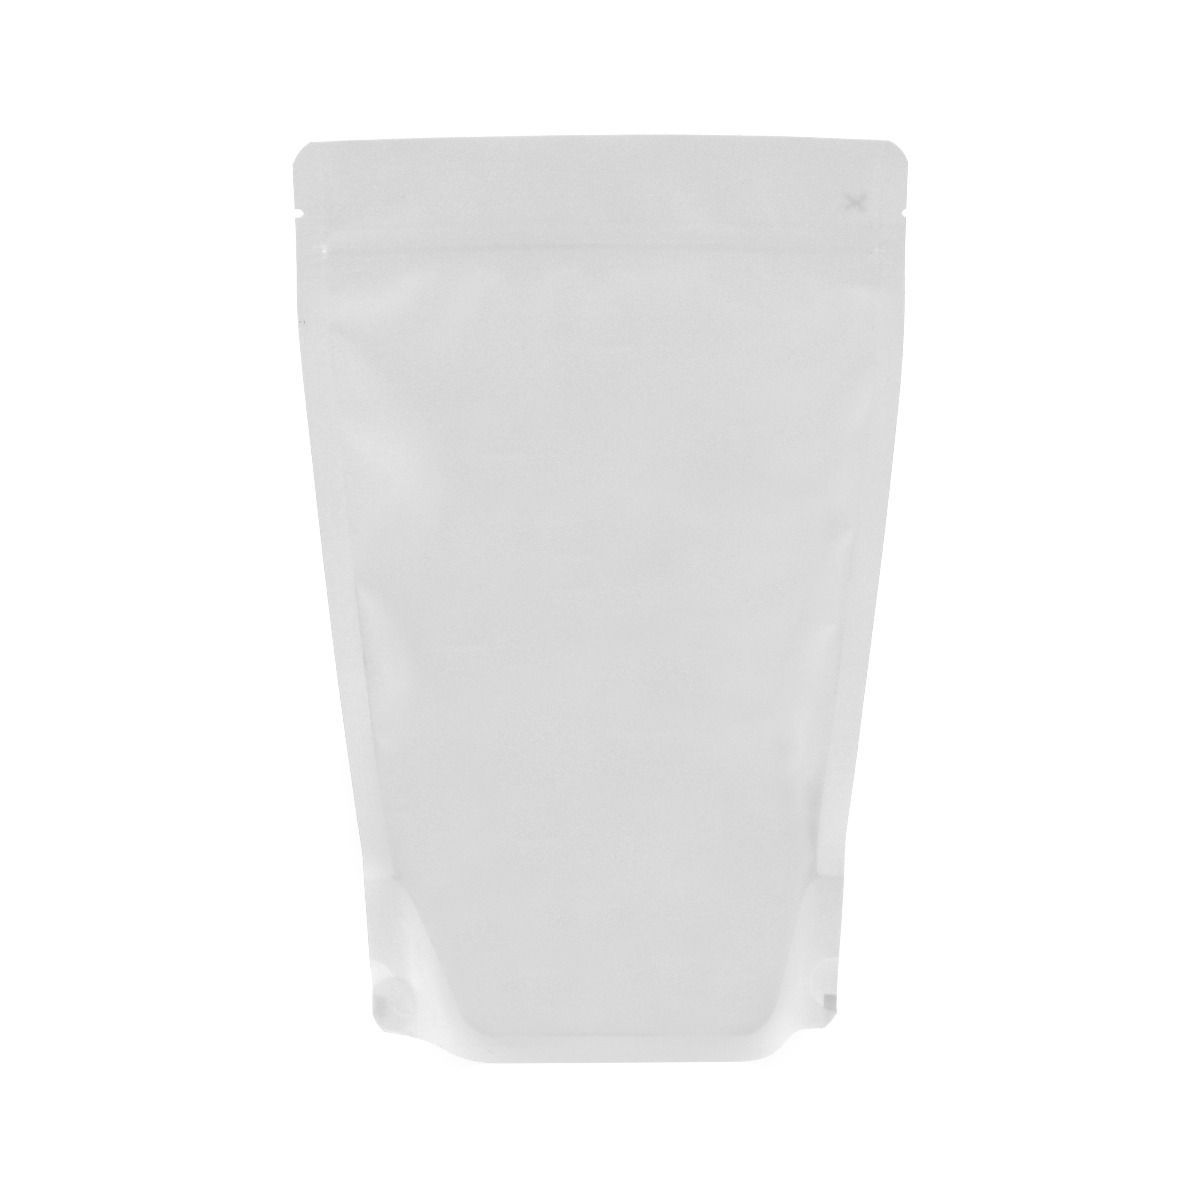 Bolsa stand-up - mate blanco (100% recyclable)